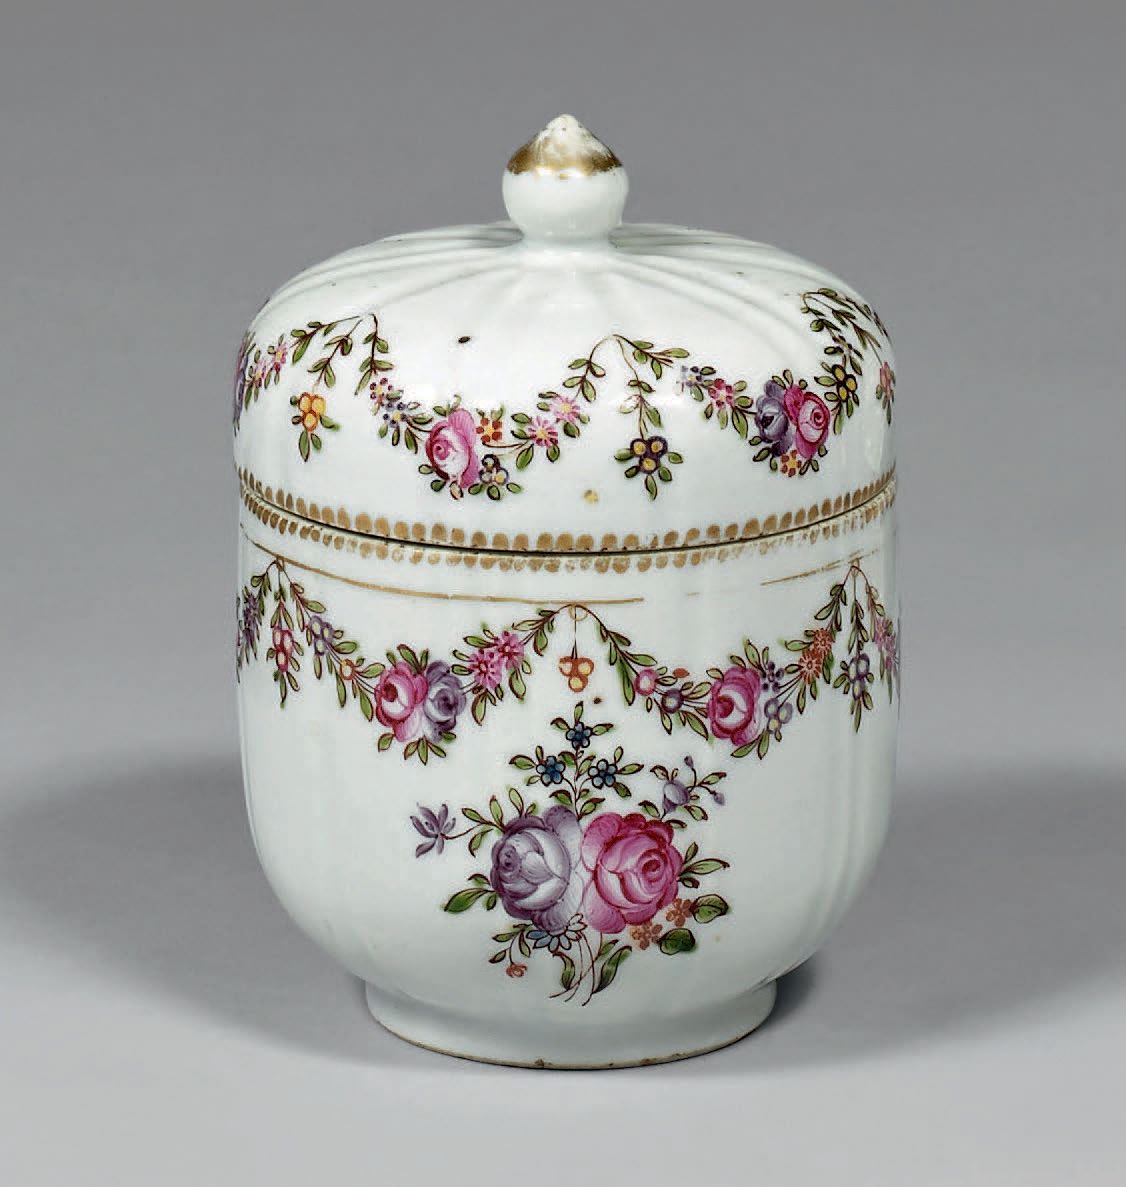 COMPAGNIE DES INDES Porcelain covered sugar bowl decorated in Famille Rose polyc&hellip;